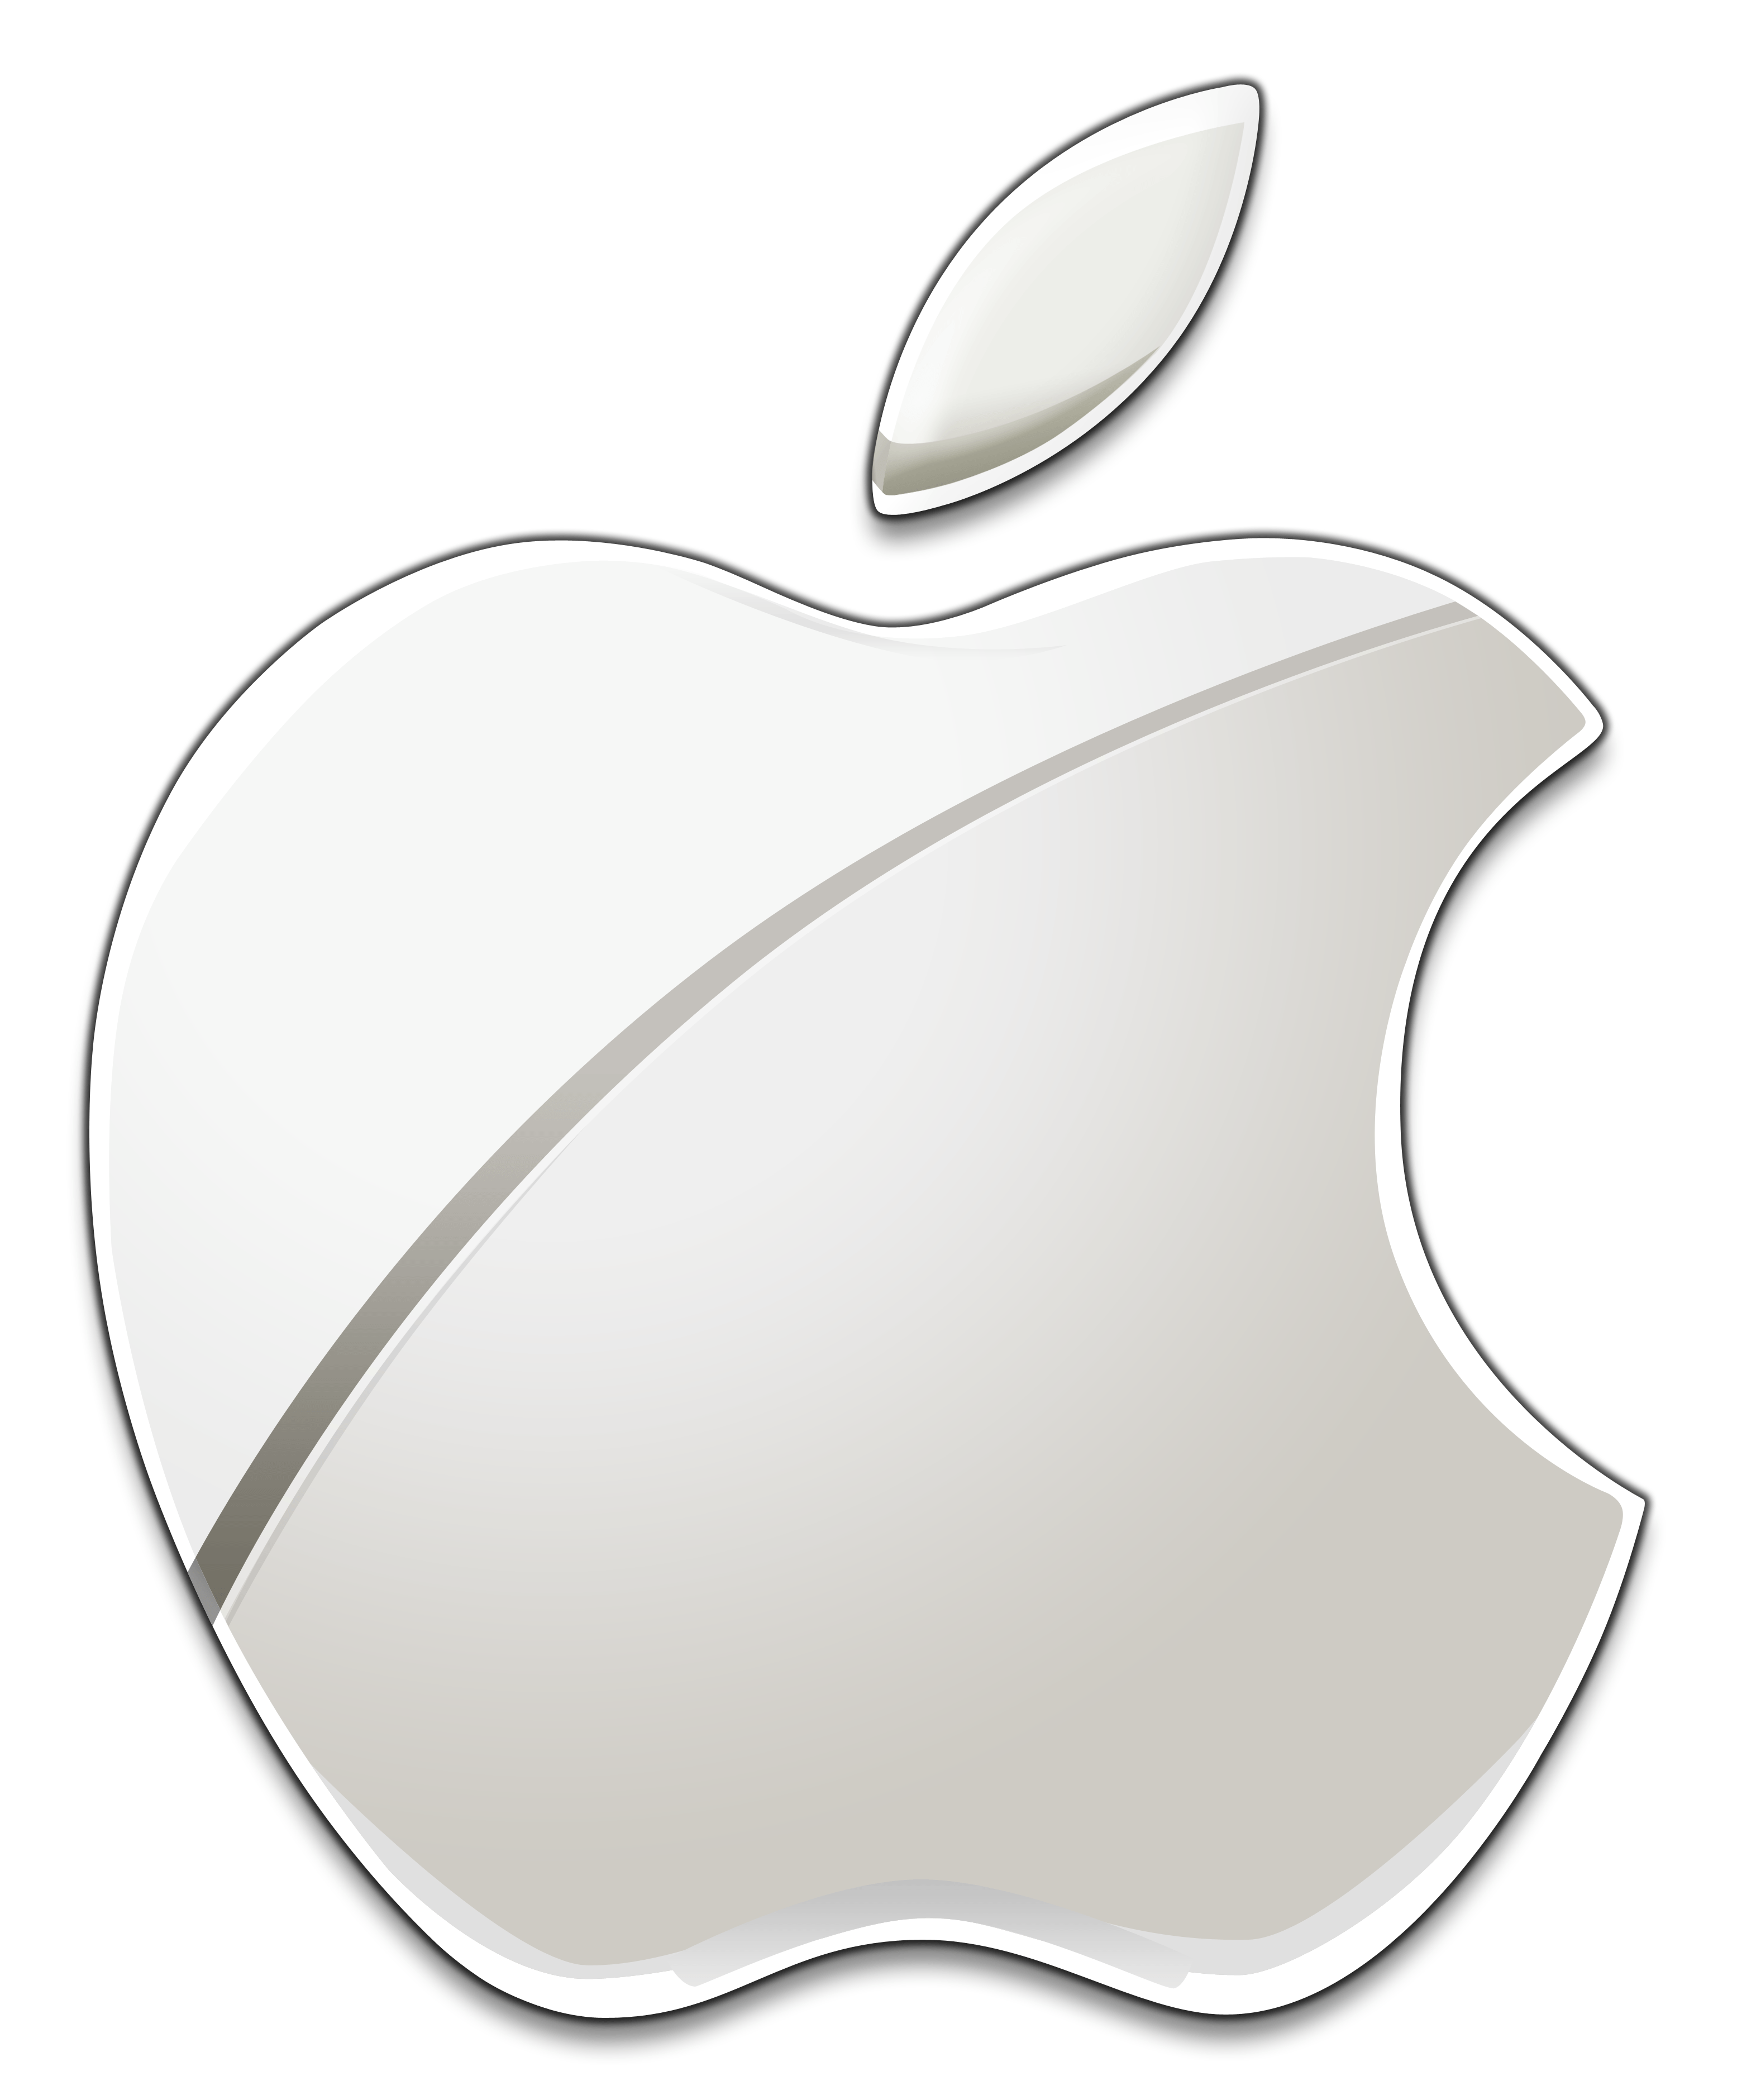 Future Apple Logo - Future iPhones to sport on-screen home button and fingerprint ...